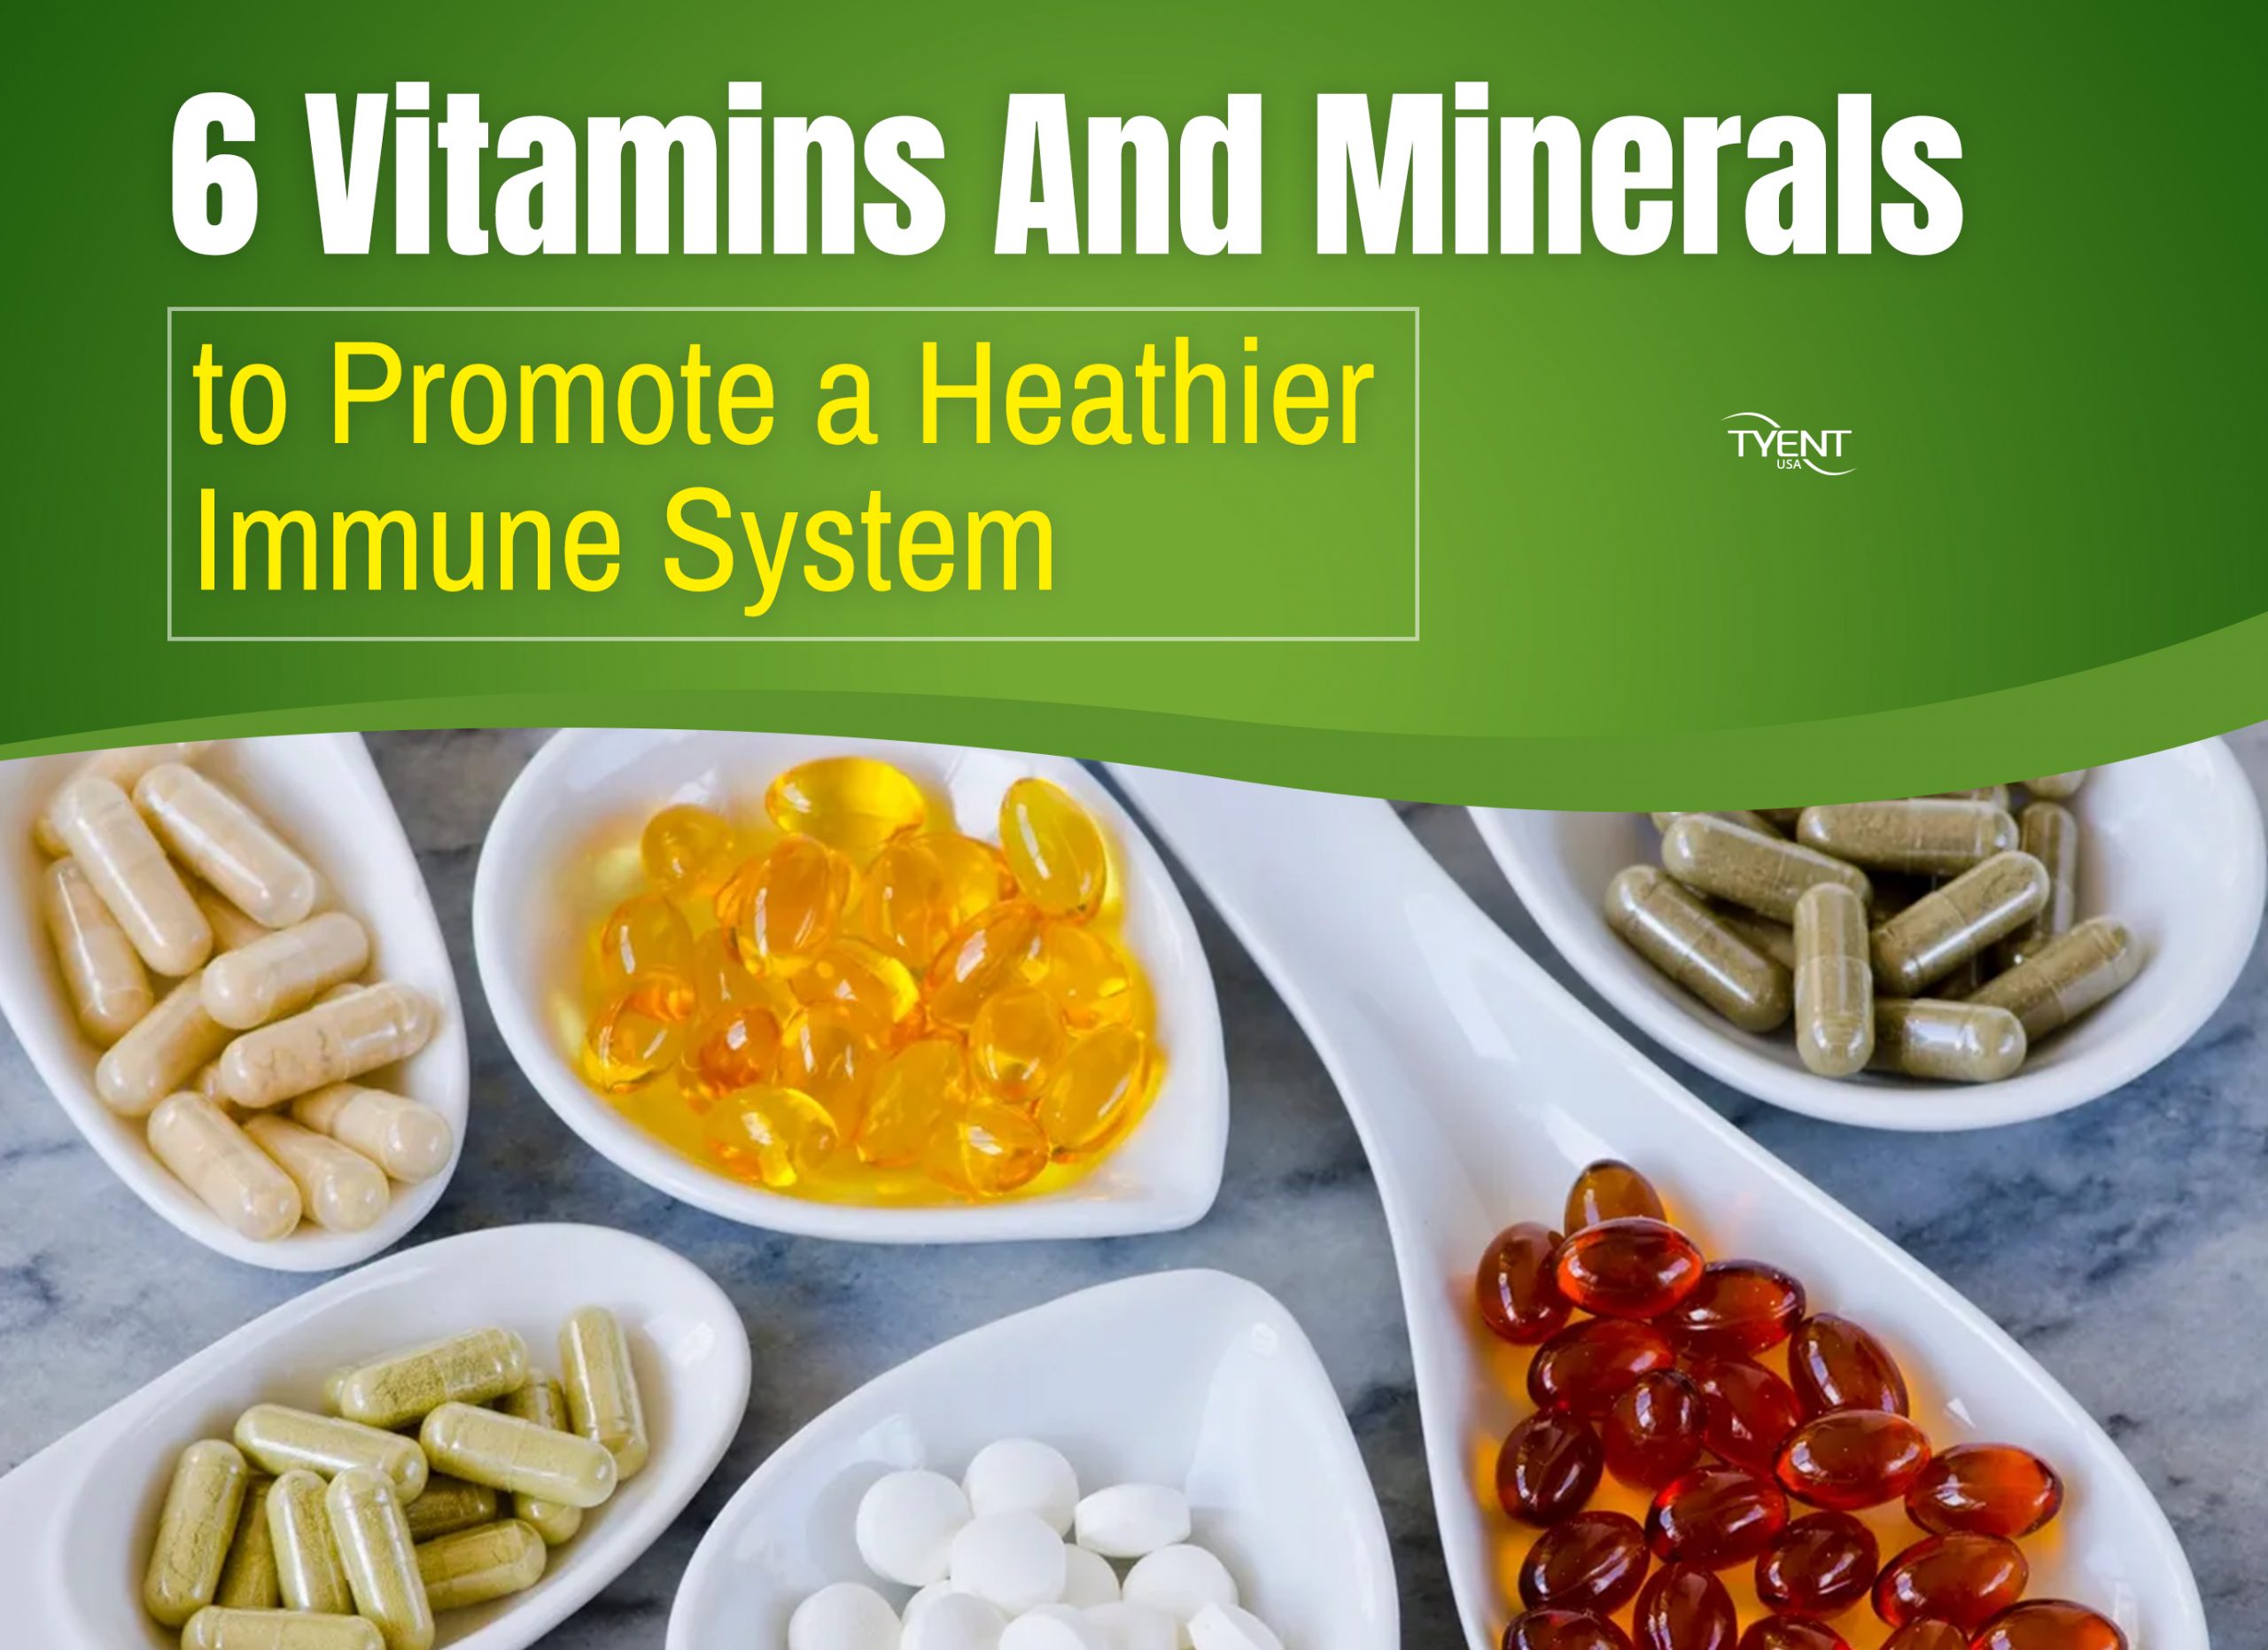 6 Vitamins & Minerals to Promote a Healthier Immune System